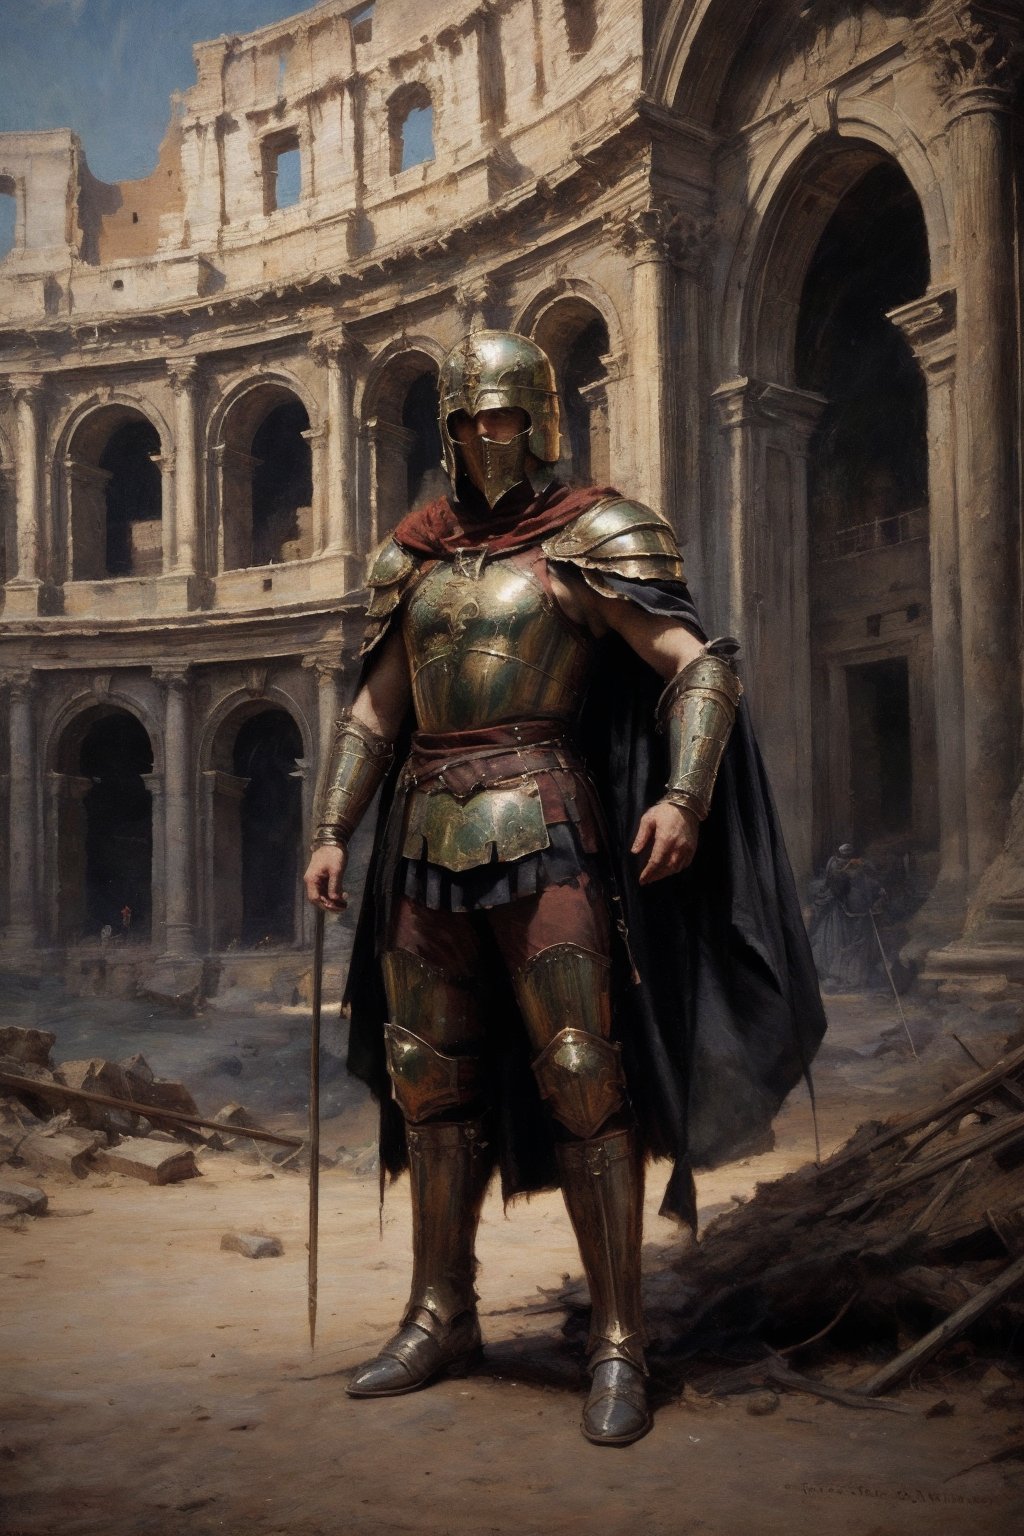 , ultra high resolution, 8k, masterpiece UHD, unparalleled masterpiece, ultra realistic 8K, 
Atmospheric perspective. Full body shot, a a roman gladiator, cape gladiator helmet, cape, megestic gladiator in Colosseum Golden armour ,,in a roman arena, dedly fight, fighters background ,    ,, highly detaild,,  , detaild background,,moss,vains,aincent ruins,Colosseum background,  intricate details, concept art,in the style of nicola samori,